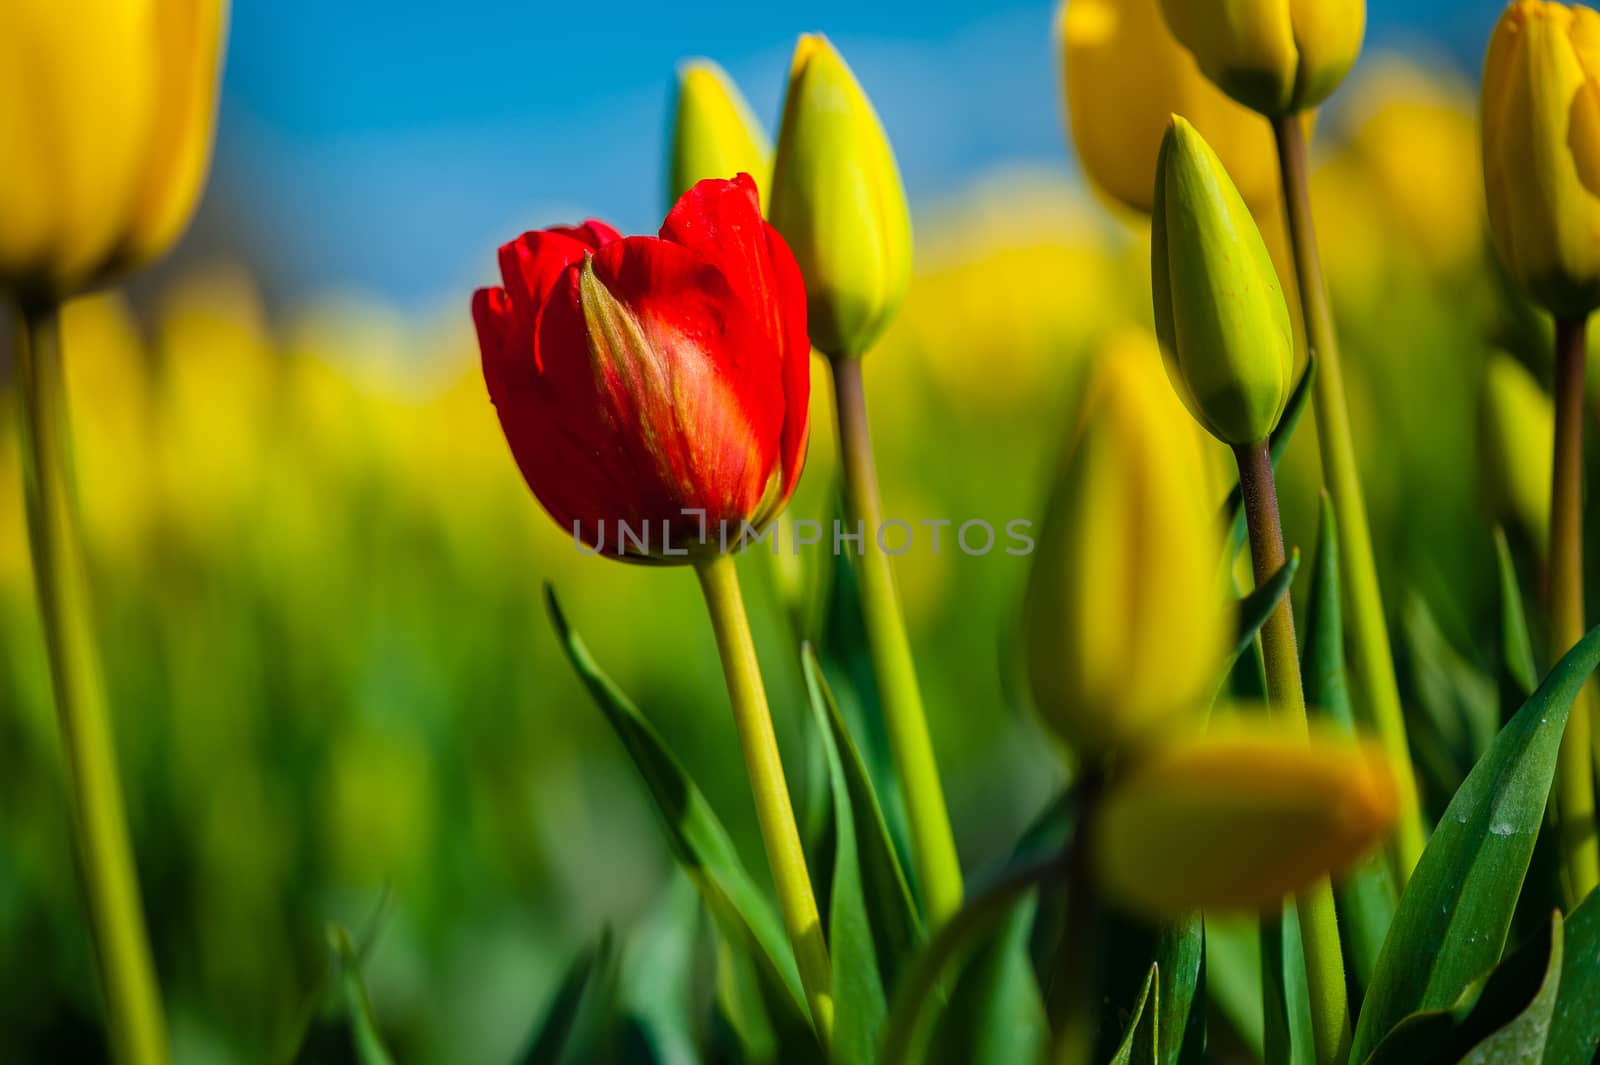 Red tulip with yellow tulips in the background against blue sky at the Skagit Tulip Festival, Washington